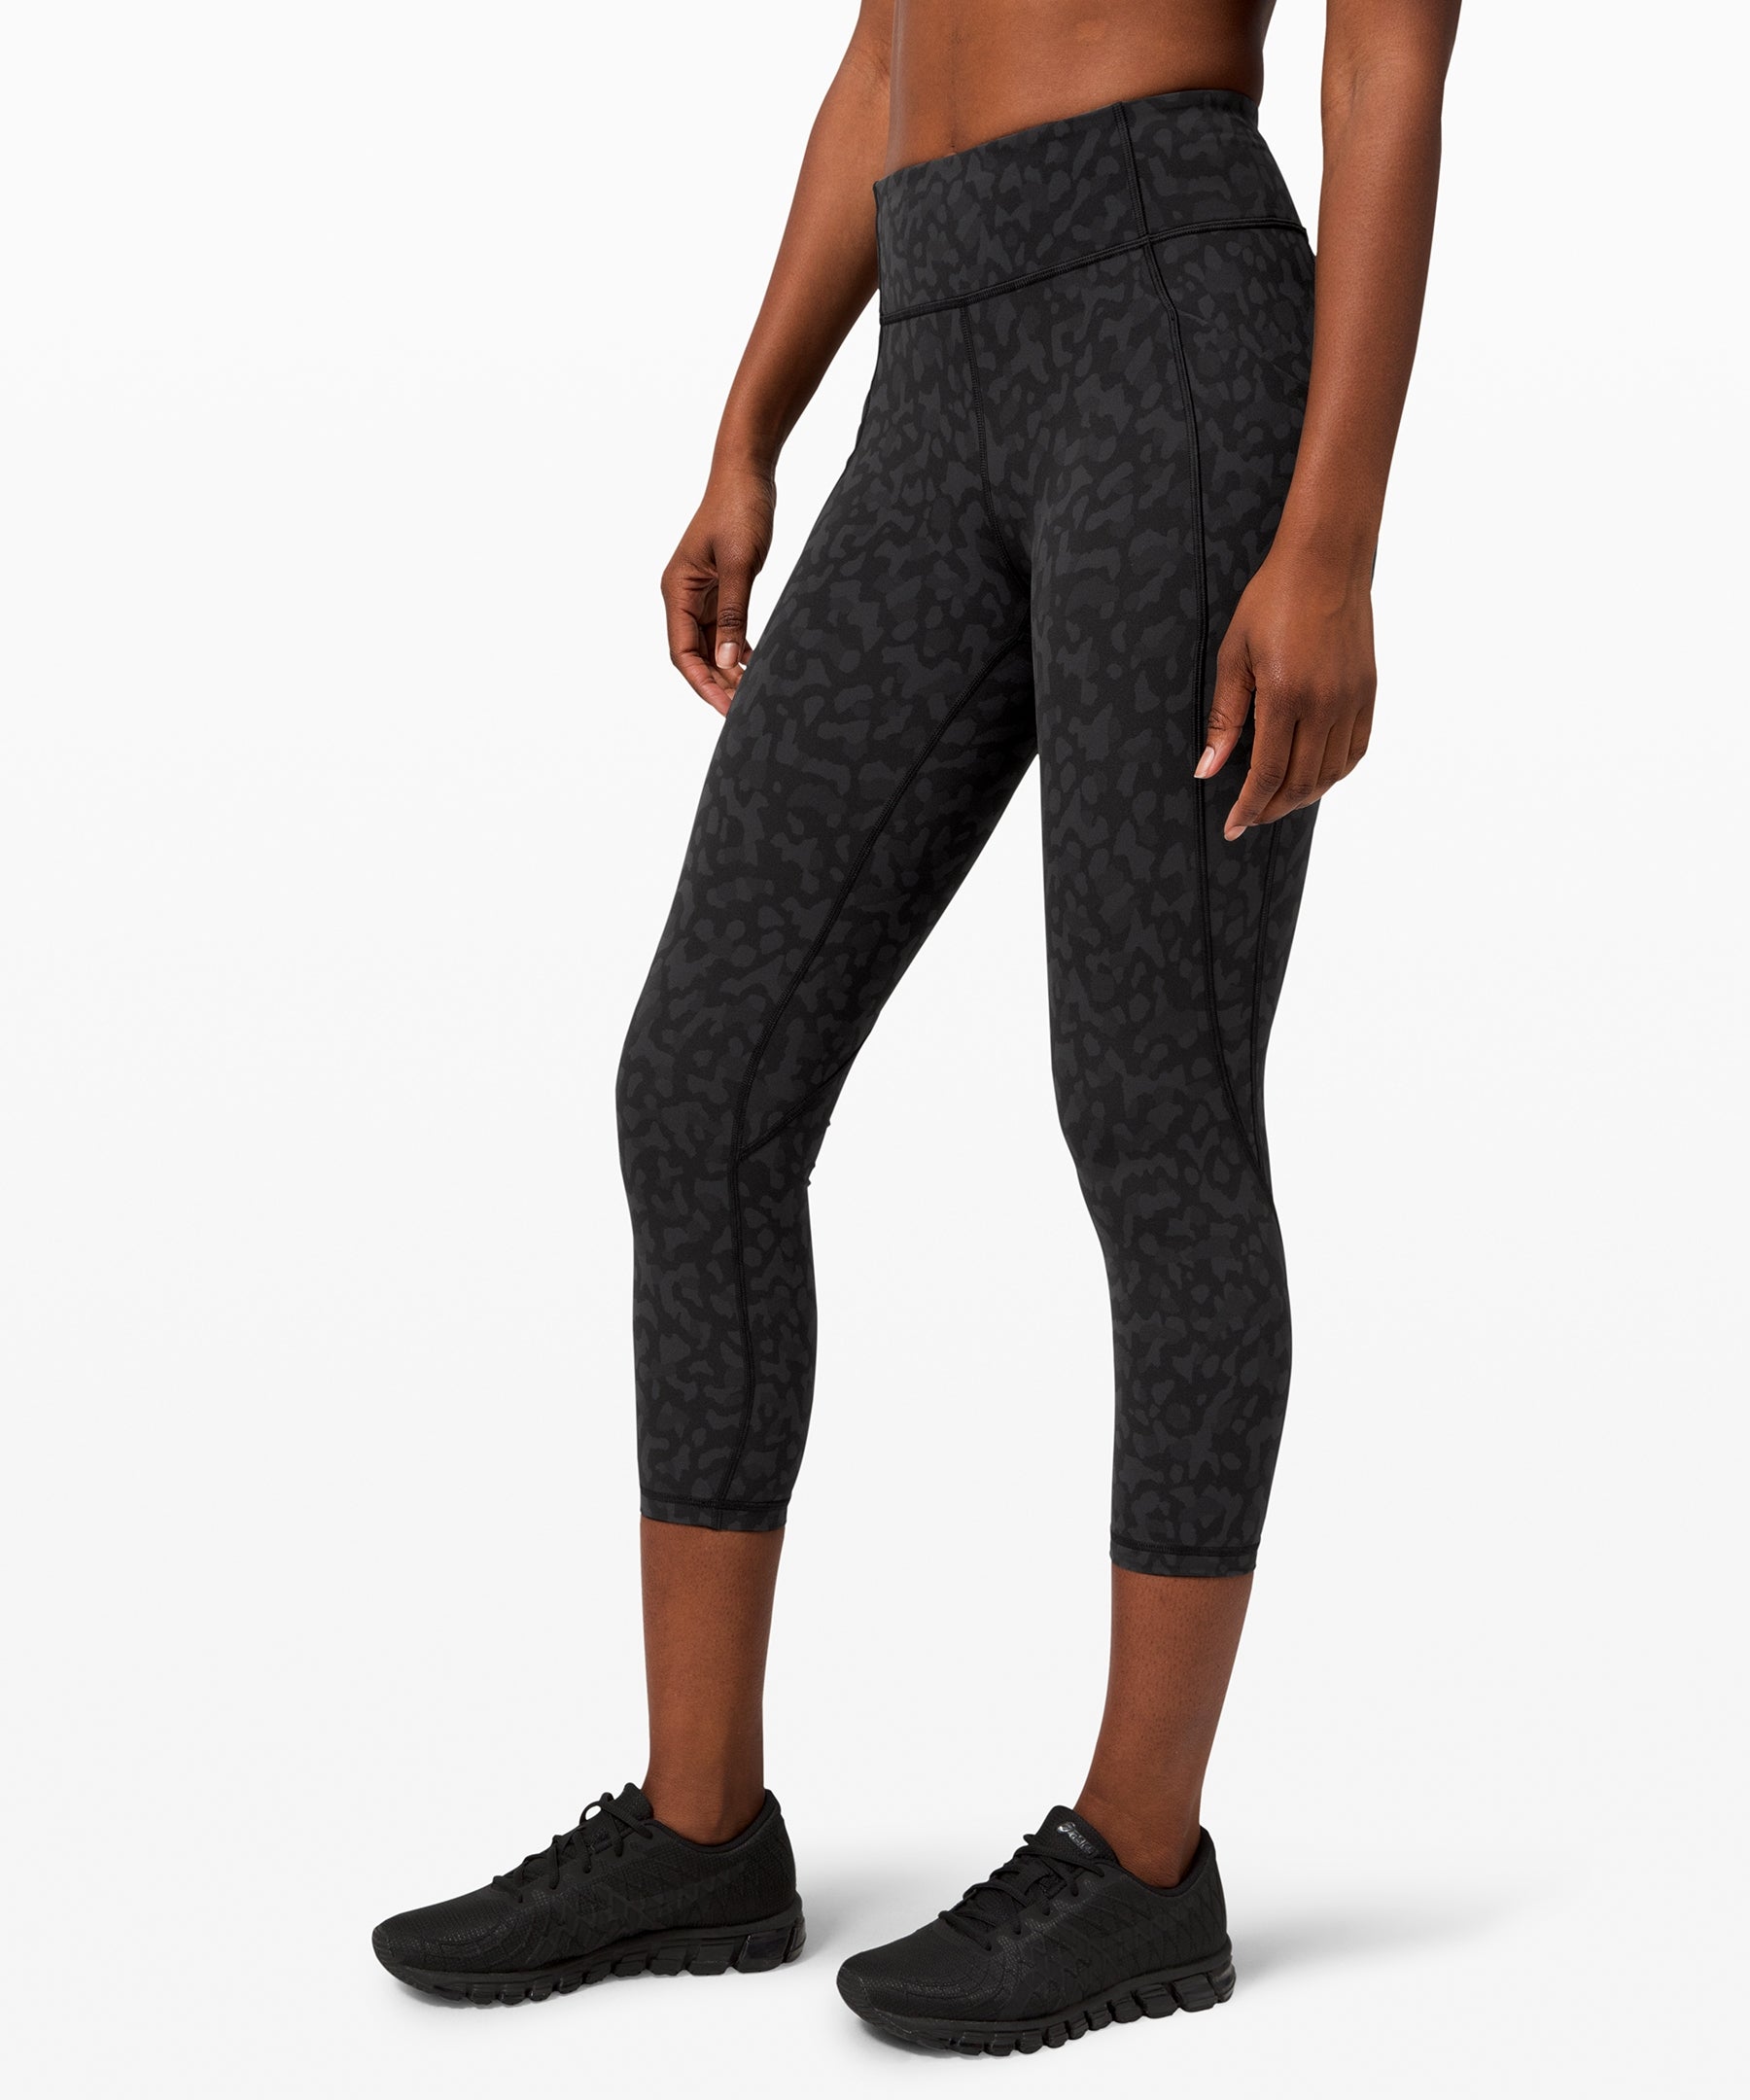 Lululemon's 'naked' yoga pants are by design this time